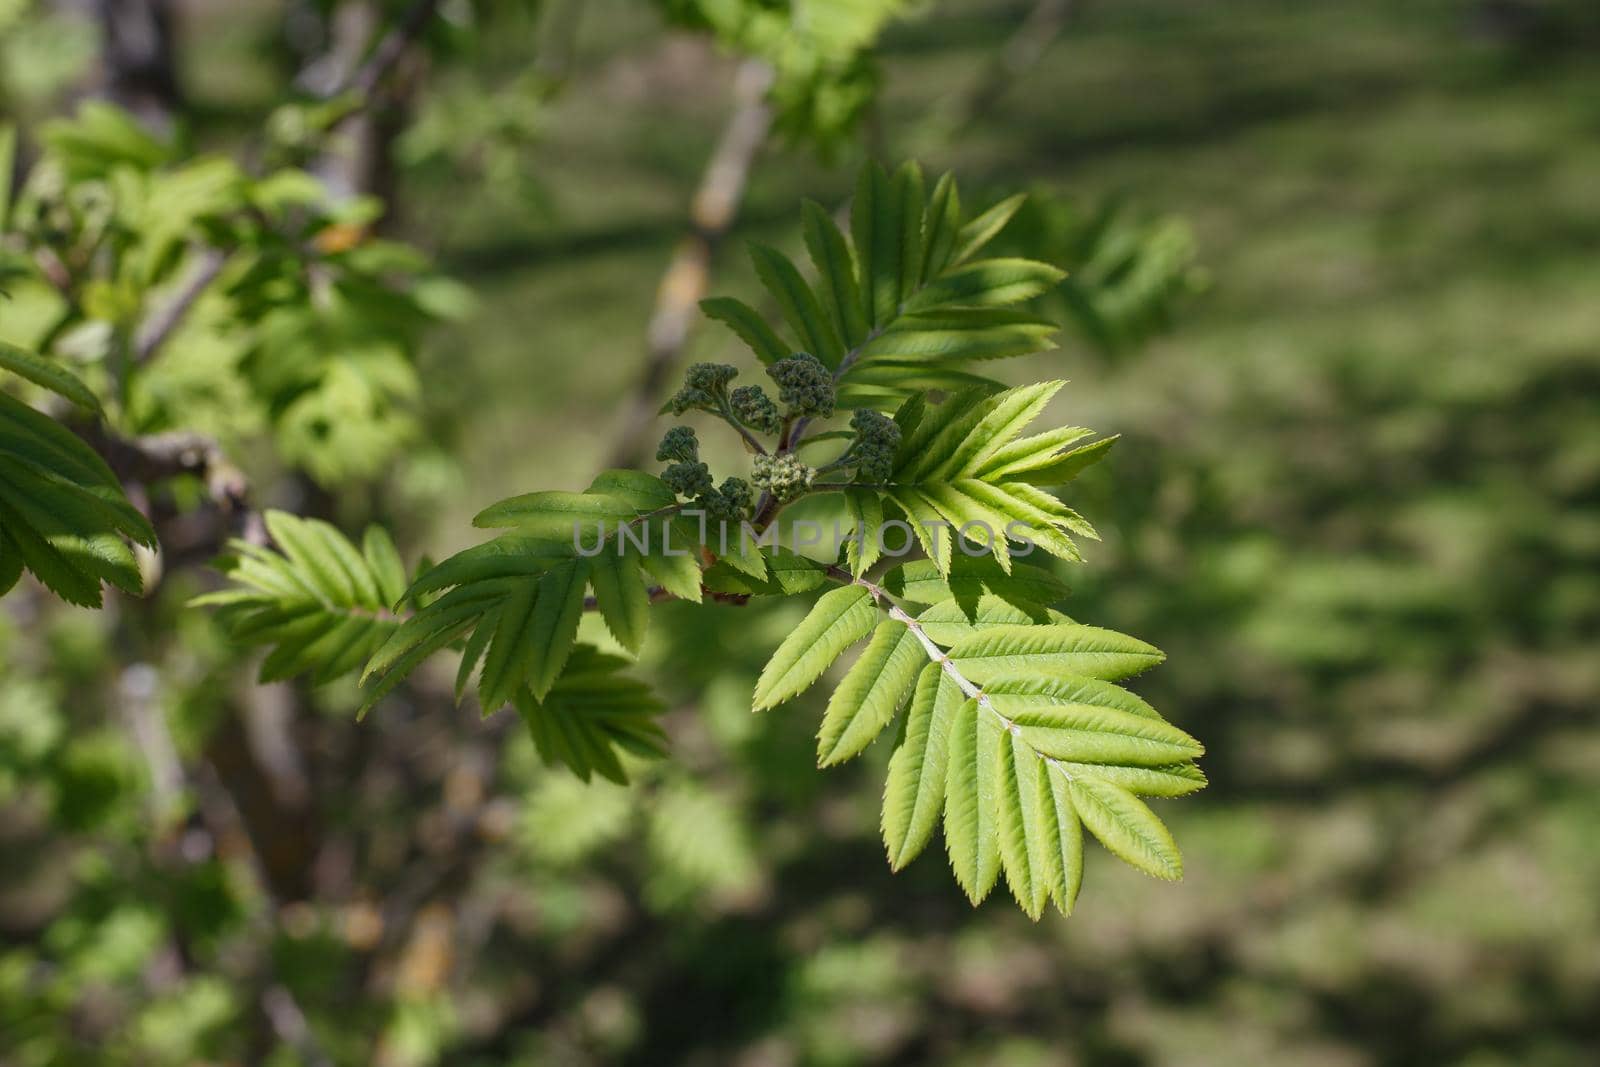 Selective focus, close up of twig with young tree leaves against green blurred background. Natural background. Concept of spring, parks, nature or home gardening